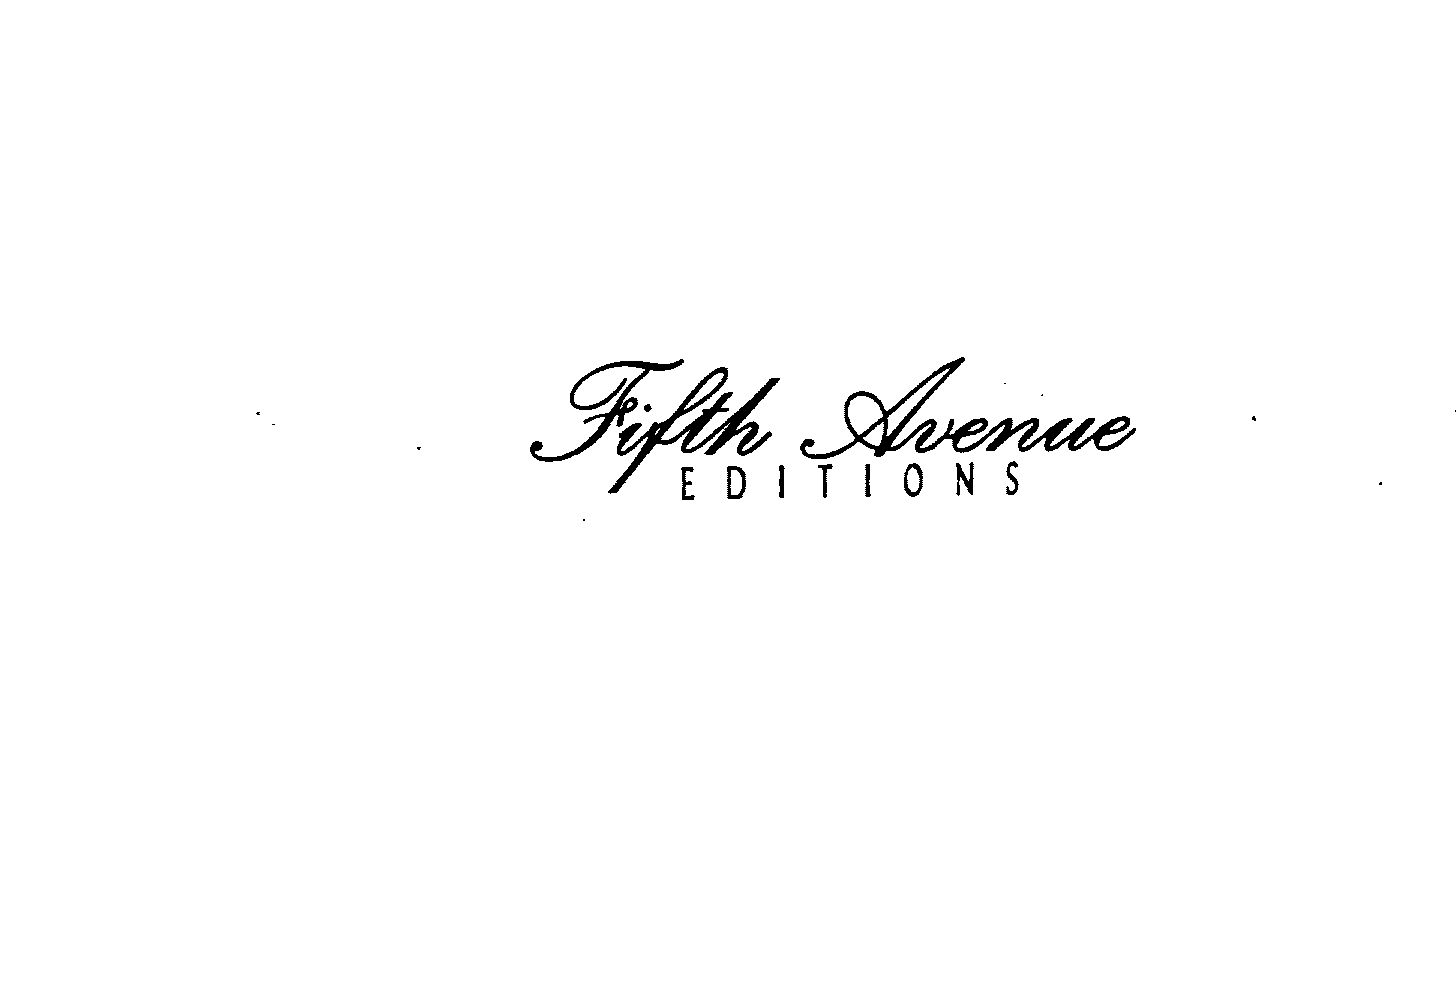  FIFTH AVENUE EDITIONS